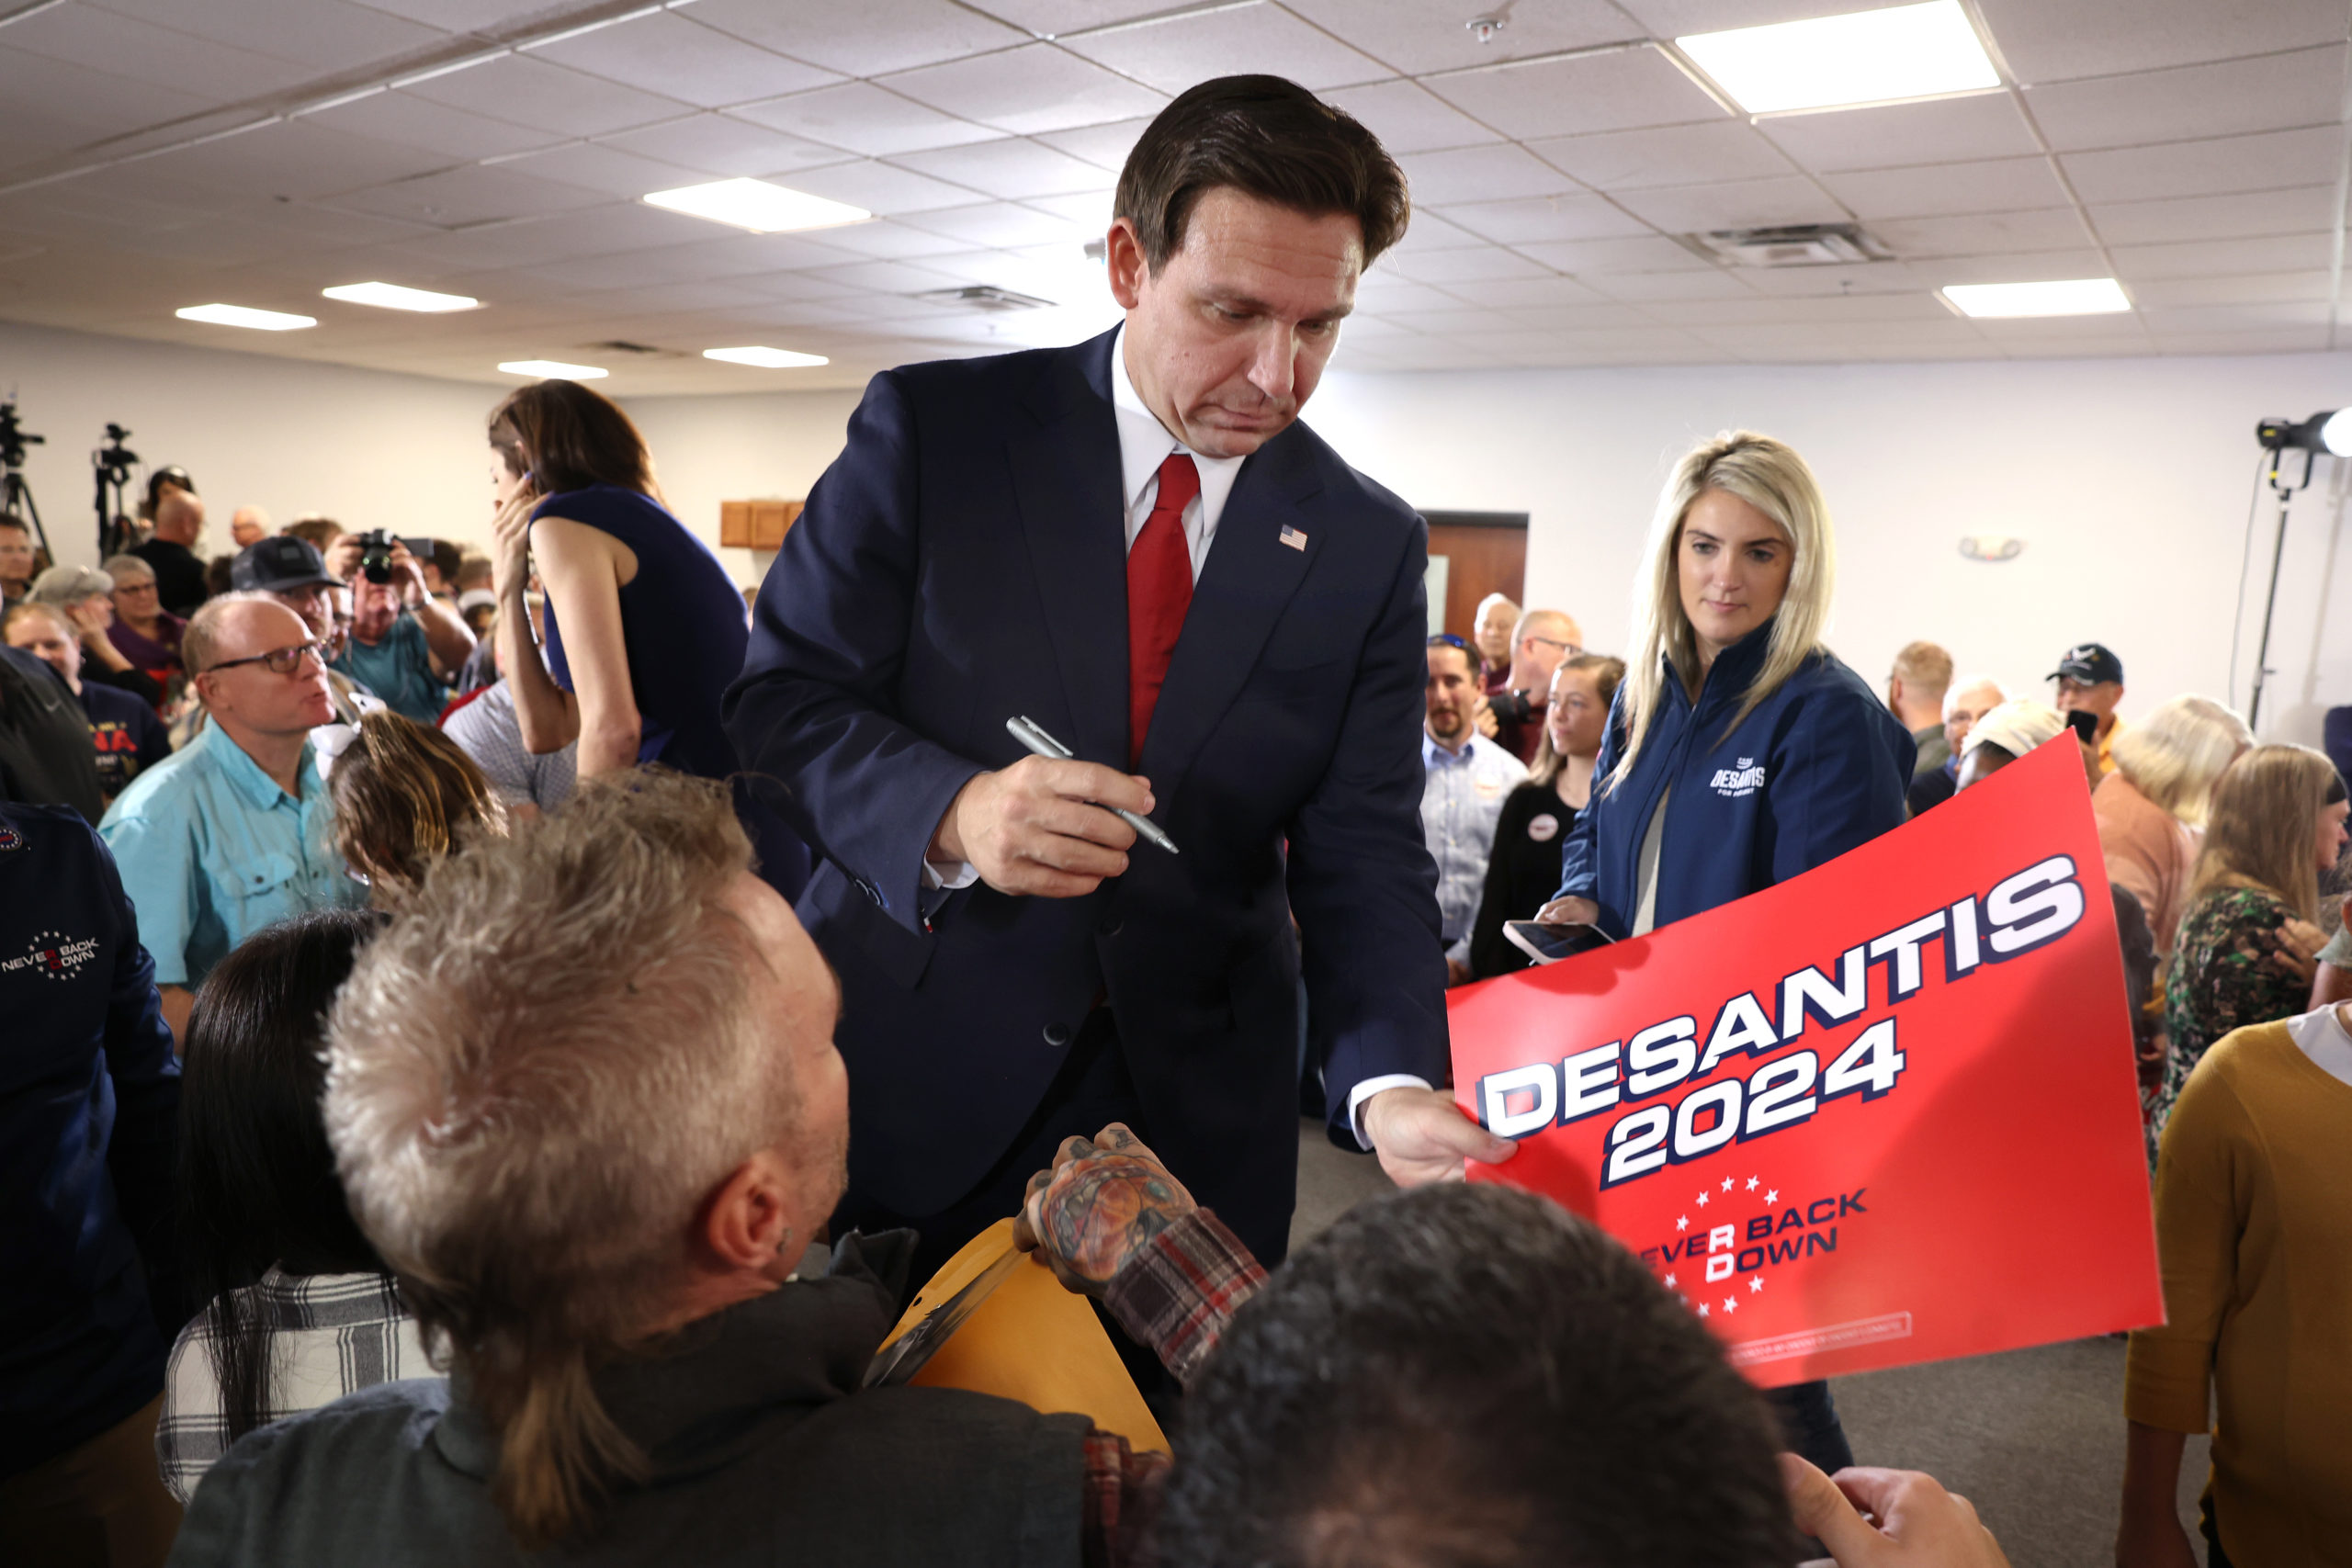 Republican presidential candidate Florida Governor Ron DeSantis greets guests during a campaign event at Refuge City Church on October 08, 2023 in Cedar Rapids, Iowa. DeSantis said Israel can and should defend themselves against the "Hamas terrorists" during the event and said that he, unlike his adversary Republican presidential candidate former President Donald Trump, has a plan to make Mexico pay for building a border wall. (Photo by Scott Olson/Getty Images)